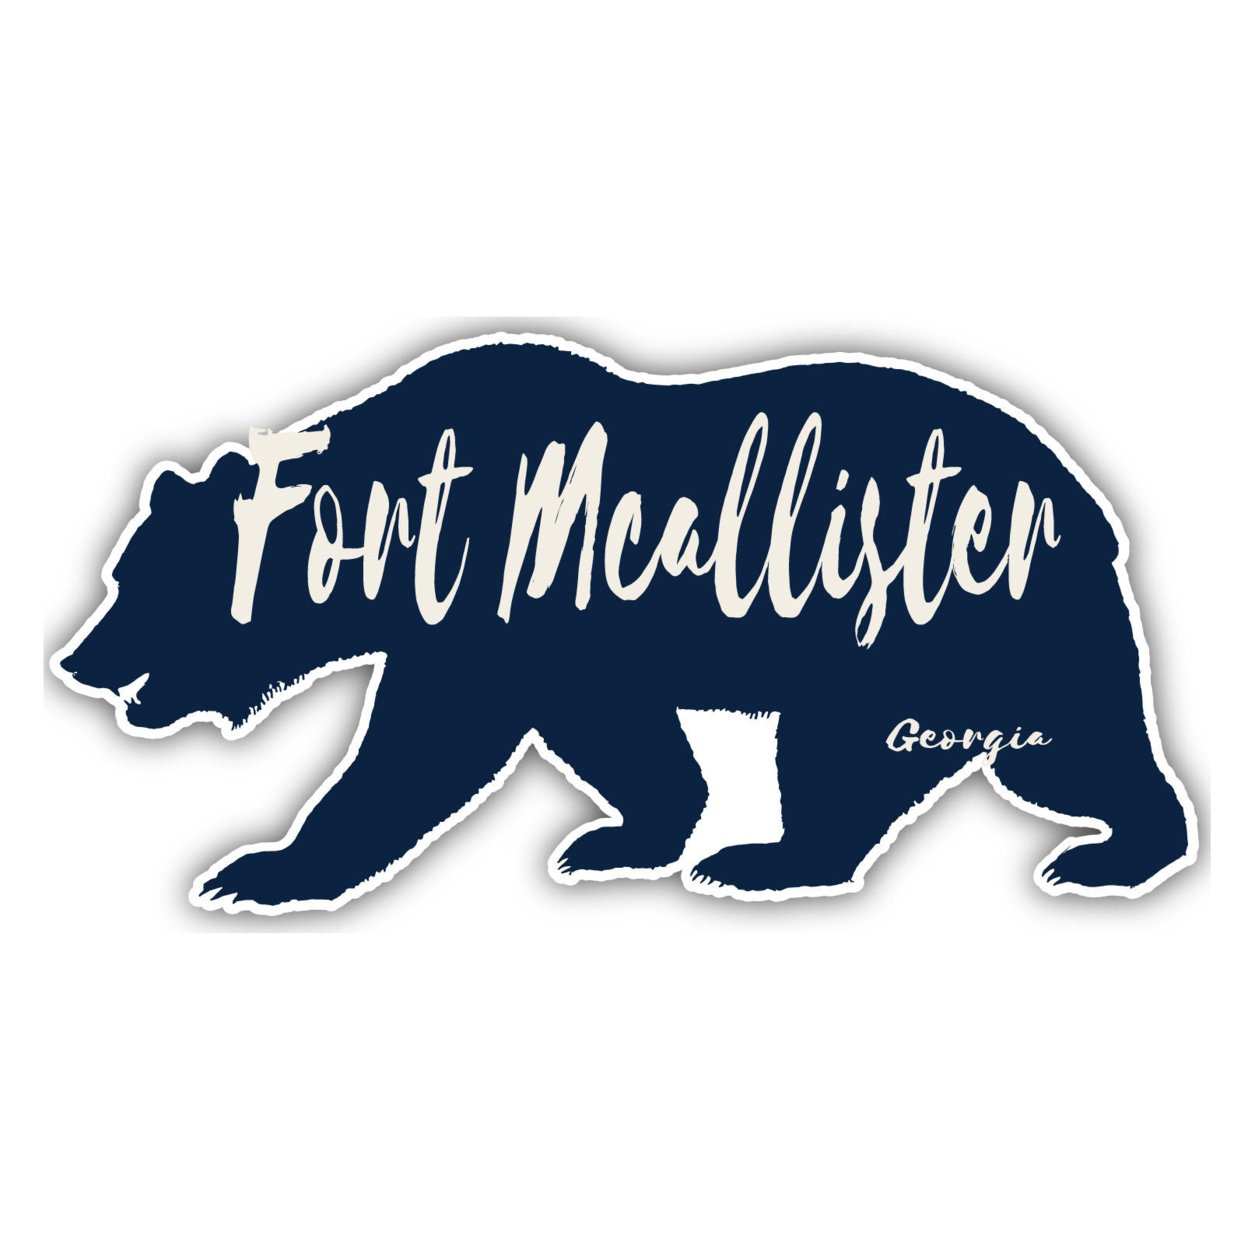 Fort McAllister Georgia Souvenir Decorative Stickers (Choose Theme And Size) - Single Unit, 4-Inch, Great Outdoors